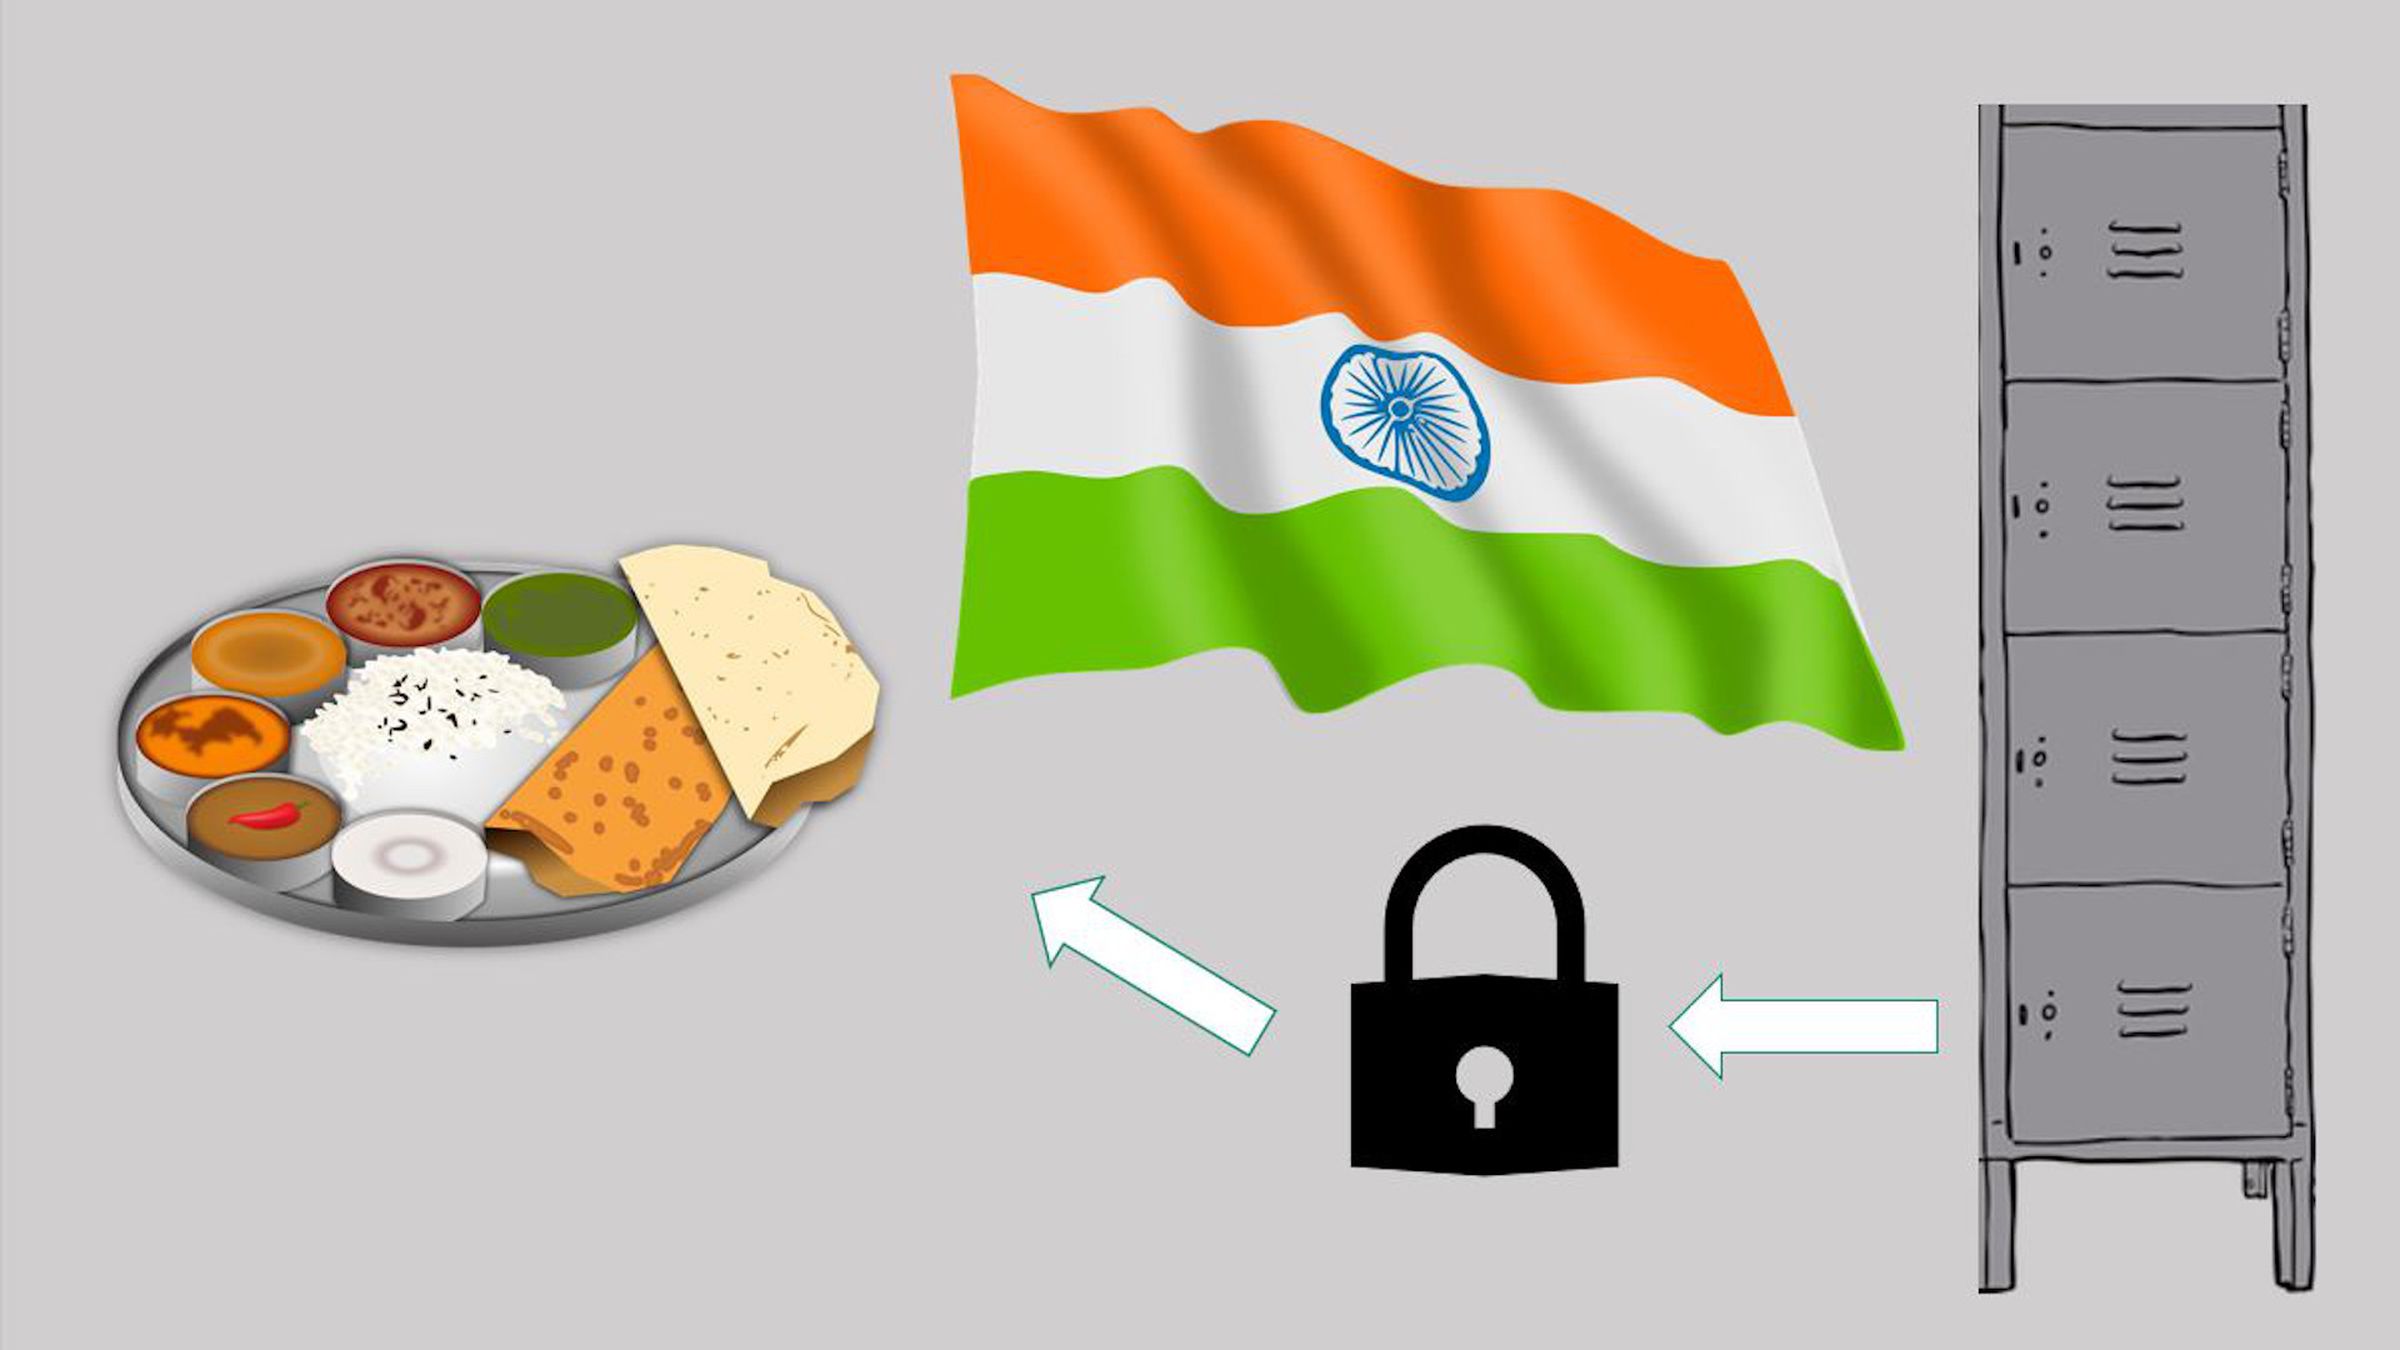 Four pictures on a gray background: a stack of four small lockers, an Indian flag, a padlock, and a plate of Indian food including bread, rice, and sauces. Arrows point from the lockers to the padlock, and from the padlock to the food.